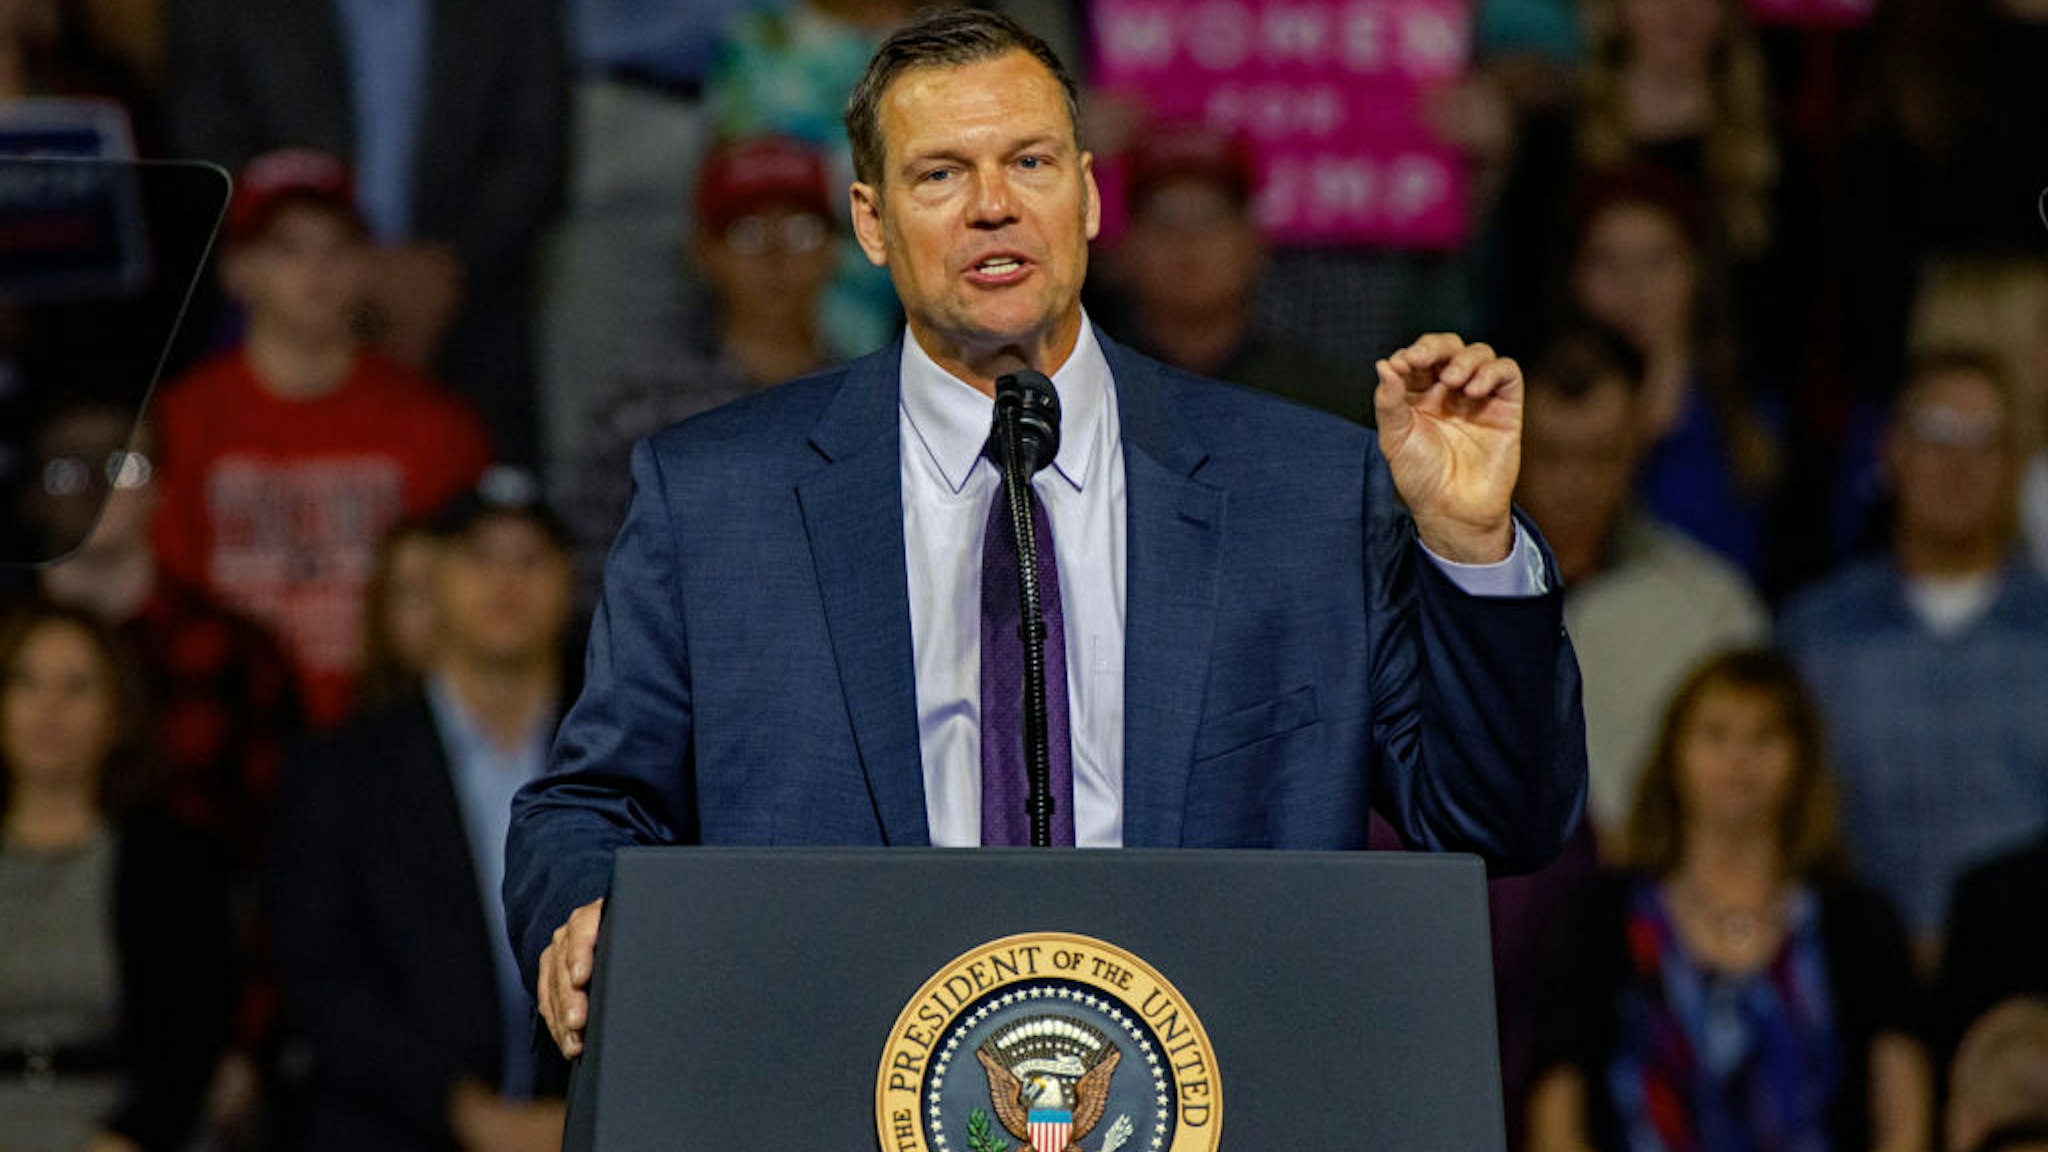 Kansas Secretary of State and current Republican candidate for Kansas governor Kris Kobach addresses President Trump’s MAGA rally held in Landon Arena in Topeka, Kansas, October 6, 2018.